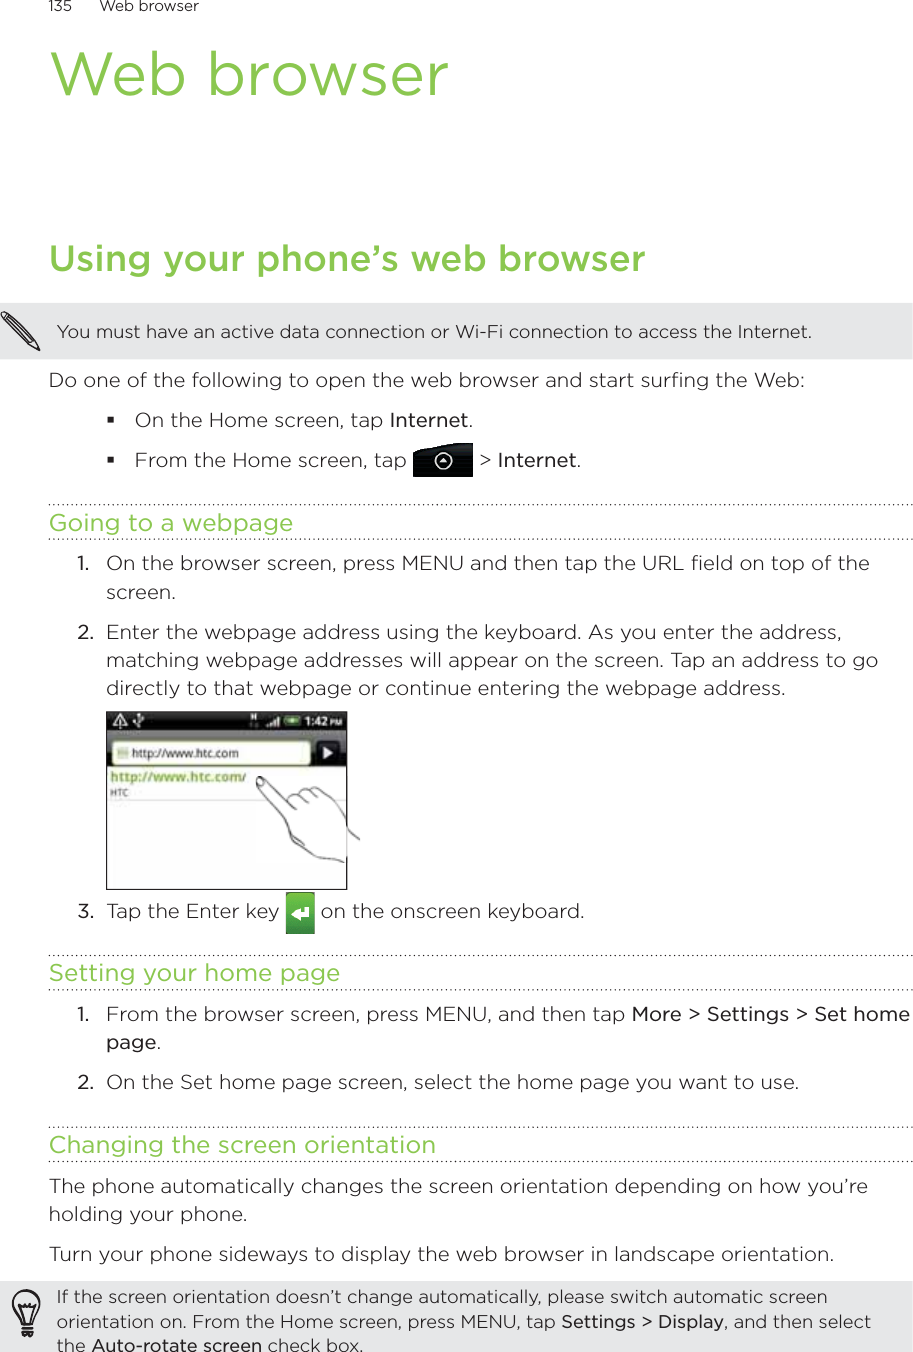 135      Web browser      Web browserUsing your phone’s web browserYou must have an active data connection or Wi-Fi connection to access the Internet.Do one of the following to open the web browser and start surfing the Web:On the Home screen, tap Internet.From the Home screen, tap  &gt; Internet.Going to a webpageOn the browser screen, press MENU and then tap the URL field on top of the screen.2.  Enter the webpage address using the keyboard. As you enter the address, matching webpage addresses will appear on the screen. Tap an address to go directly to that webpage or continue entering the webpage address.3.  Tap the Enter key   on the onscreen keyboard.Setting your home pageFrom the browser screen, press MENU, and then tap More &gt; Settings &gt; Set home page.On the Set home page screen, select the home page you want to use.Changing the screen orientationThe phone automatically changes the screen orientation depending on how you’re holding your phone. Turn your phone sideways to display the web browser in landscape orientation.If the screen orientation doesn’t change automatically, please switch automatic screen orientation on. From the Home screen, press MENU, tap Settings &gt; Display, and then select the Auto-rotate screen check box.1.1.2.